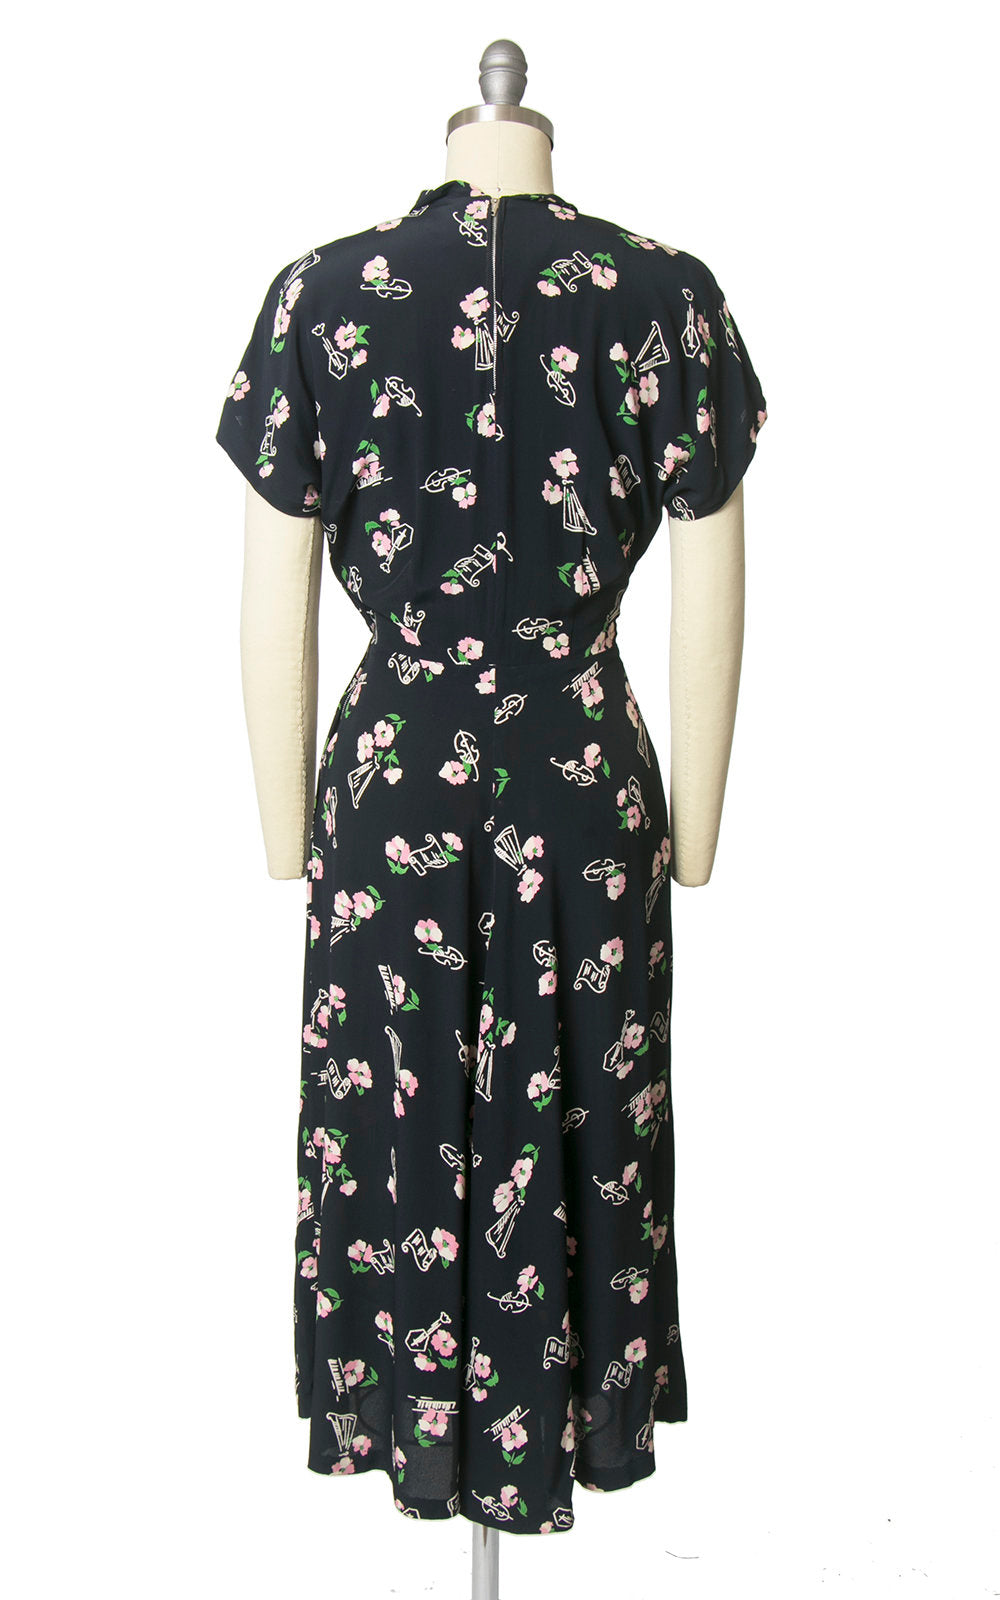 Vintage 1940s Dress | 40s Music Instruments Novelty Print Floral Rayon Crepe Navy Blue Cocktail Dress (small)